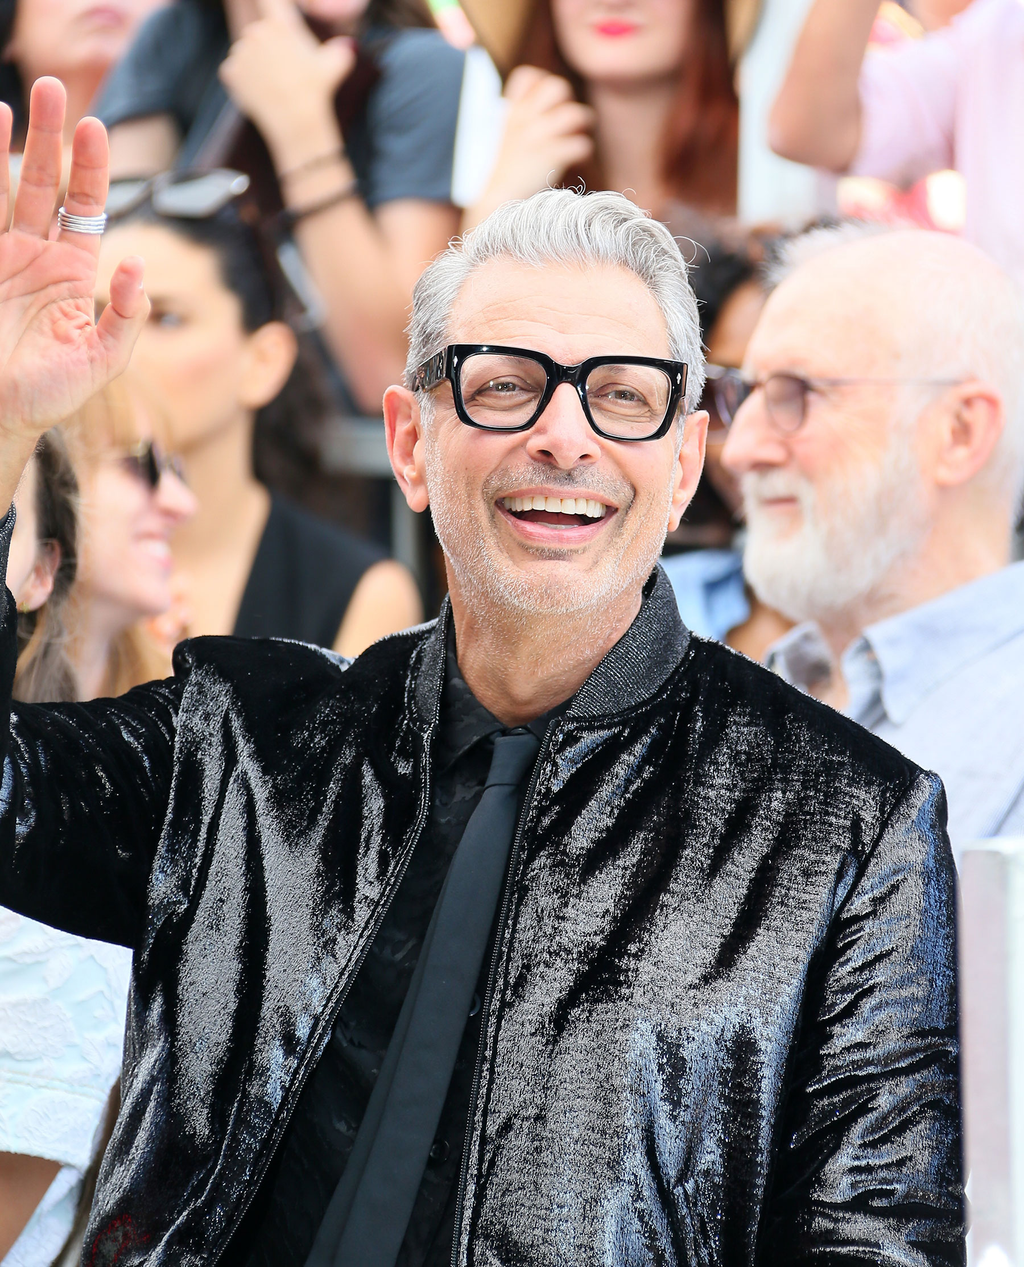 Jeff Goldblum Honored With Star On The Hollywood Walk Of Fame Arts Culture and Entertainment Celebrities Hollywood FeedRouted_NorthAmerica FeedRouted_Global 